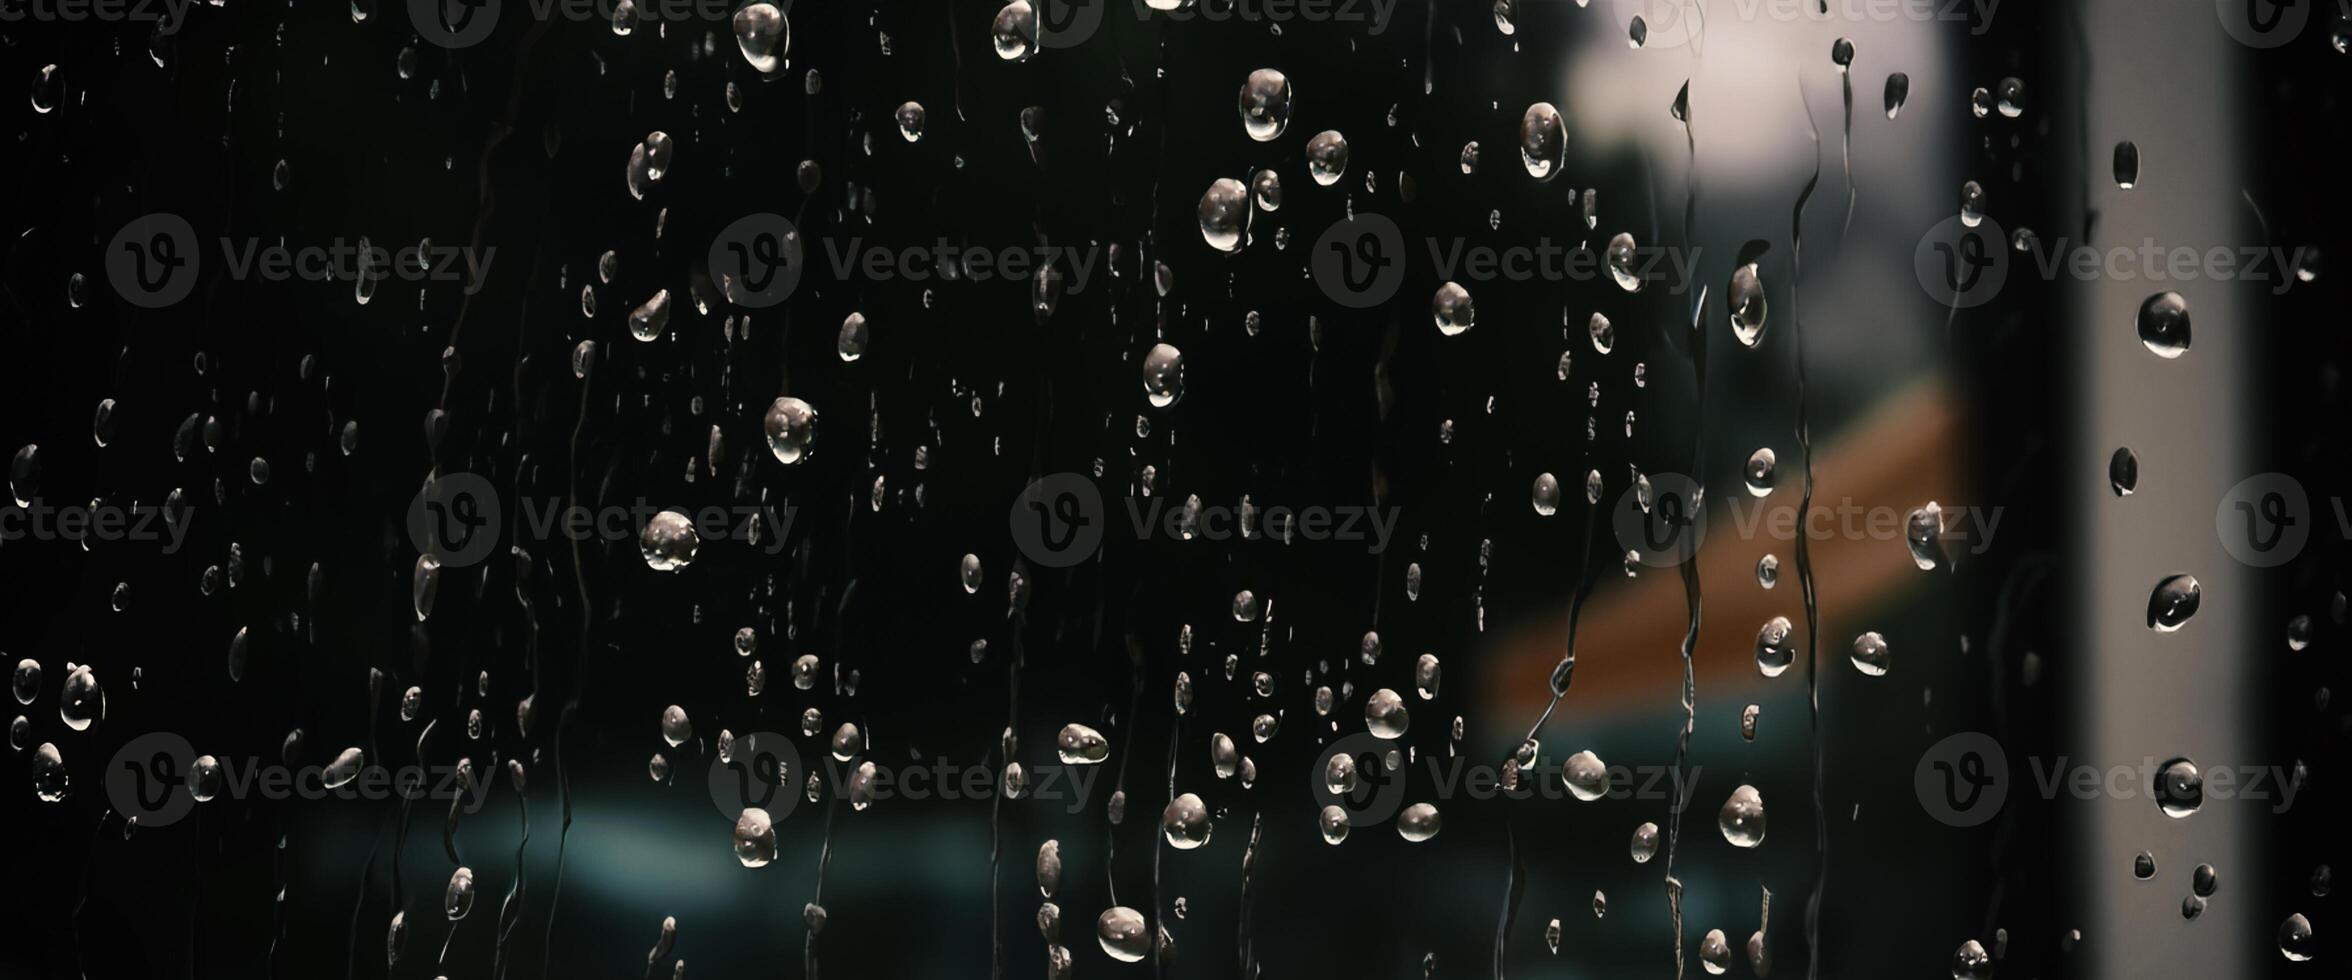 Rain drop on window glass of coffee shop and blurry city life background. Rainy season and blurry people city day life or bokeh night lights outside window. Coffee shop window covered with rain water photo